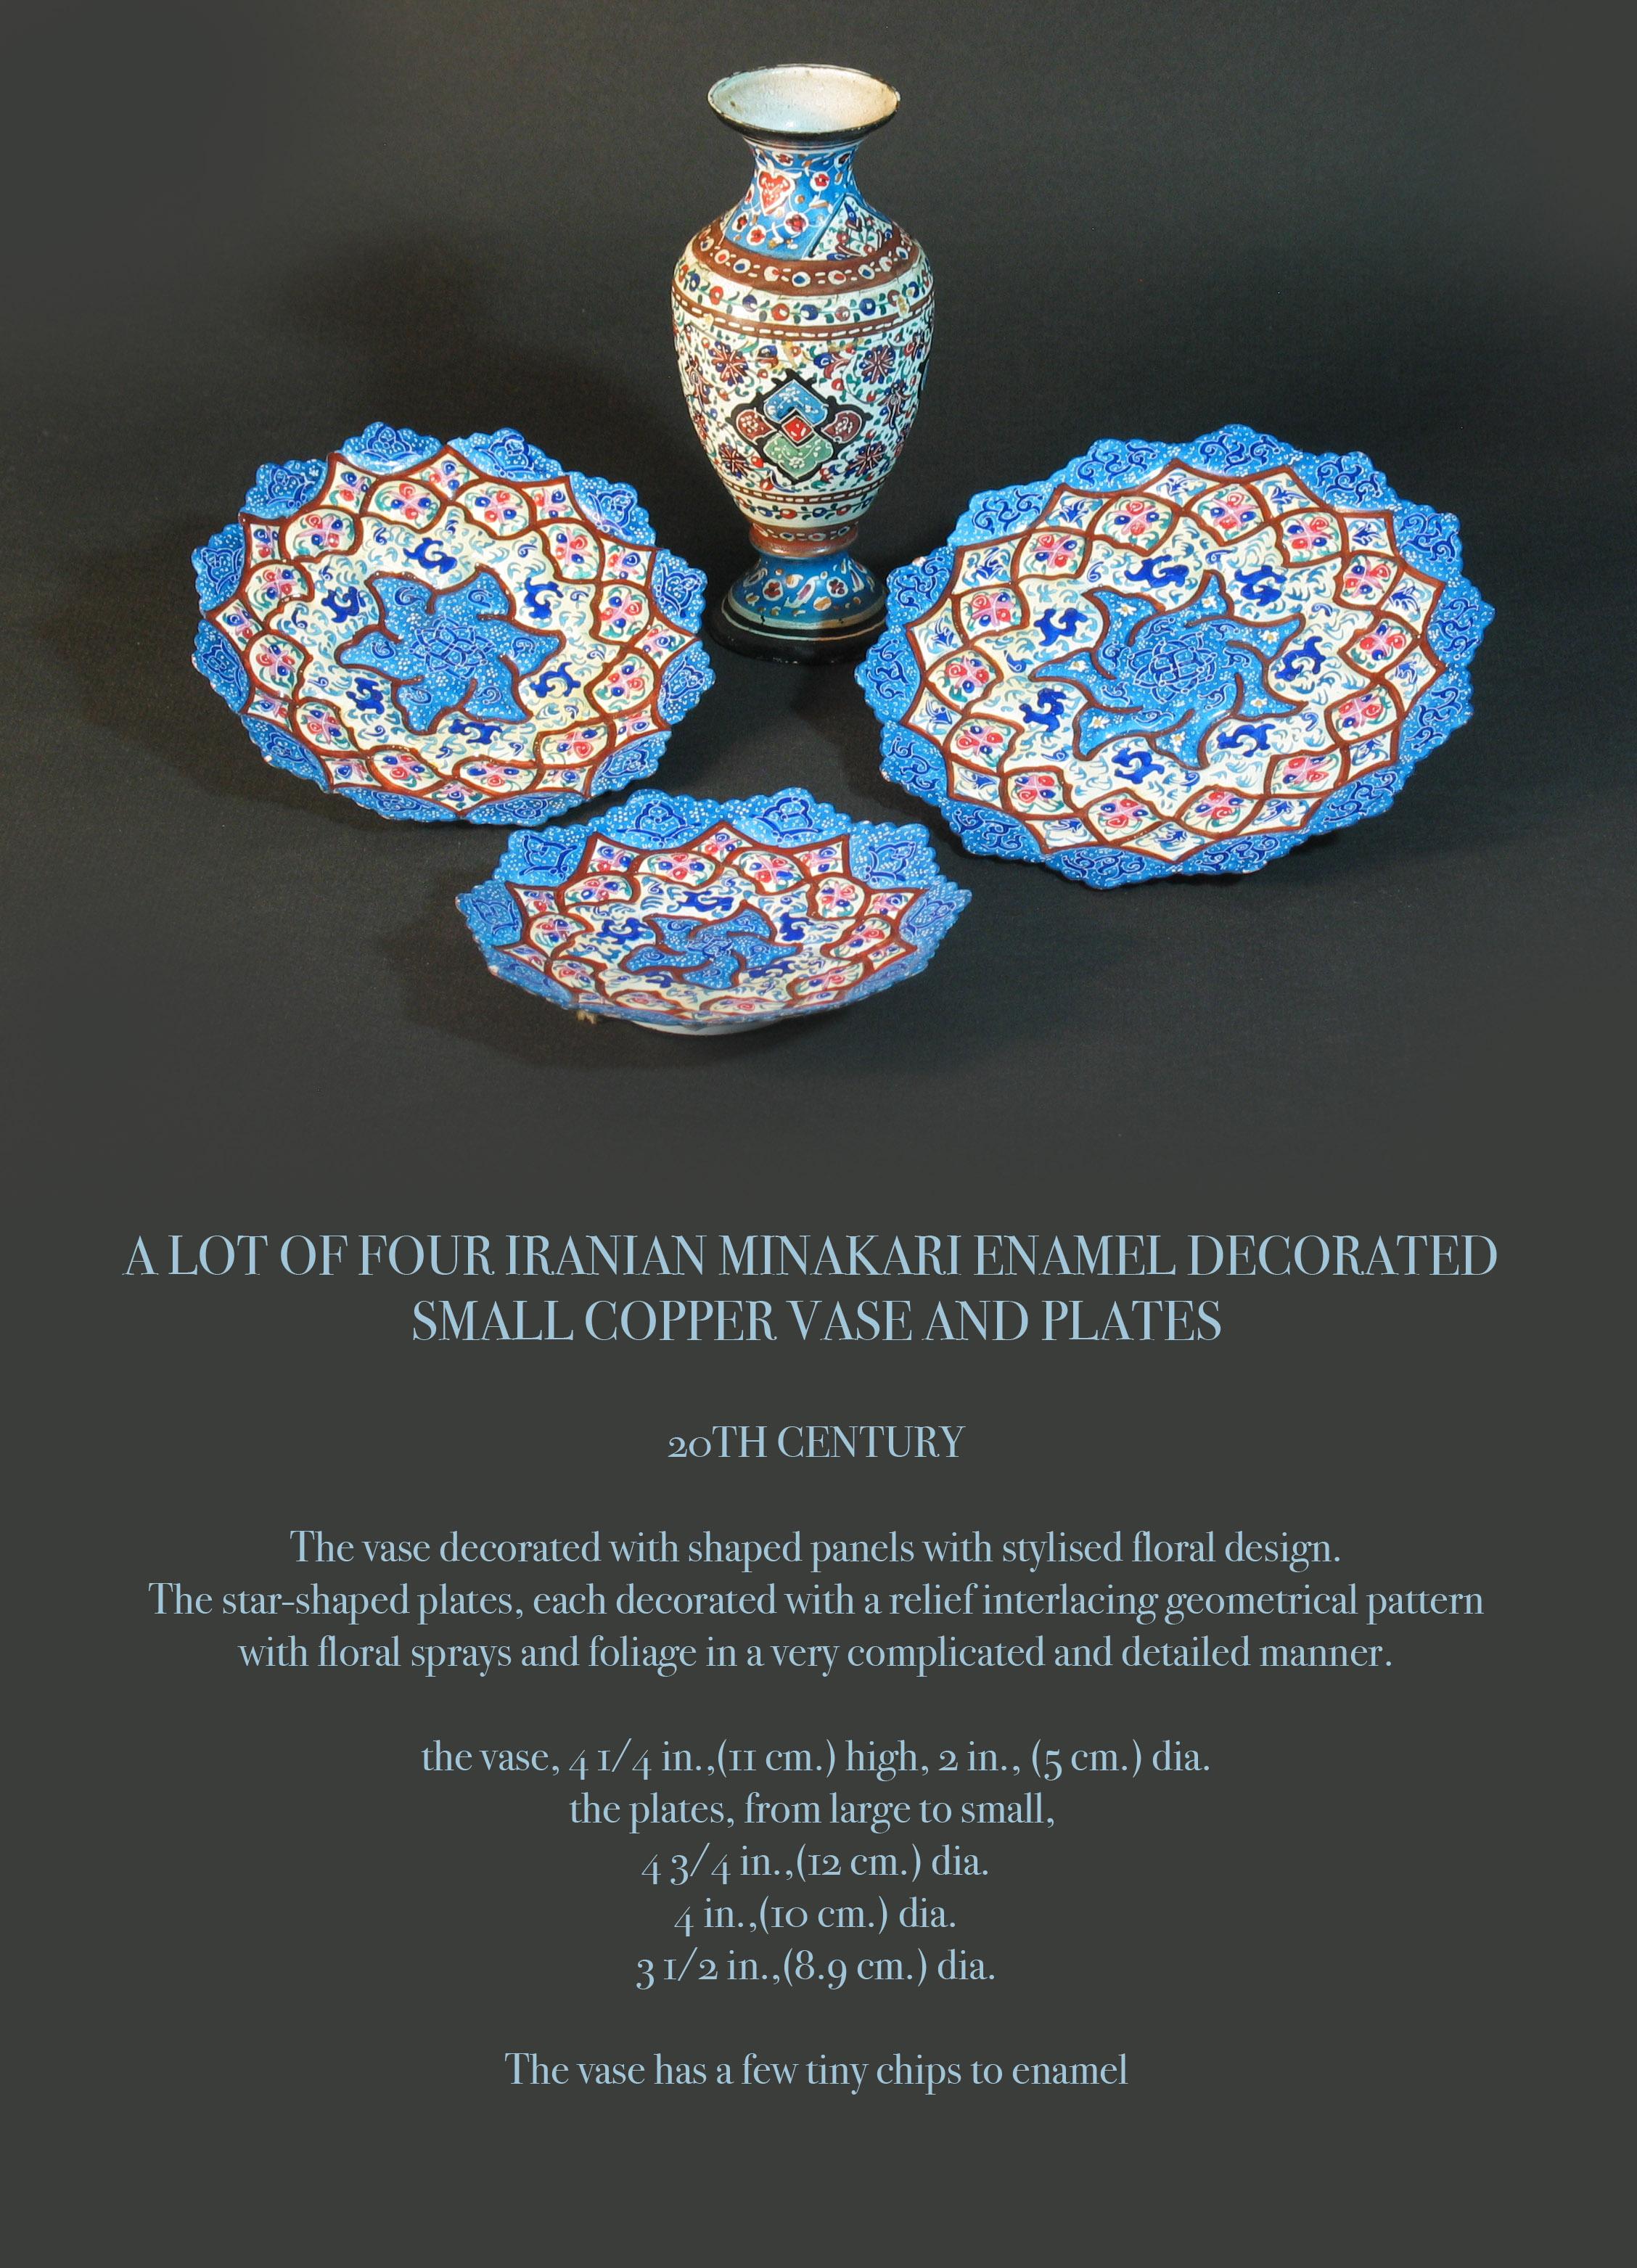 A lot of four Iranian minakari enamel decorated
Small copper vase and plates

20th century.

The vase decorated with shaped panels with stylized floral design.
The star-shaped plates, each decorated with a relief interlacing geometrical